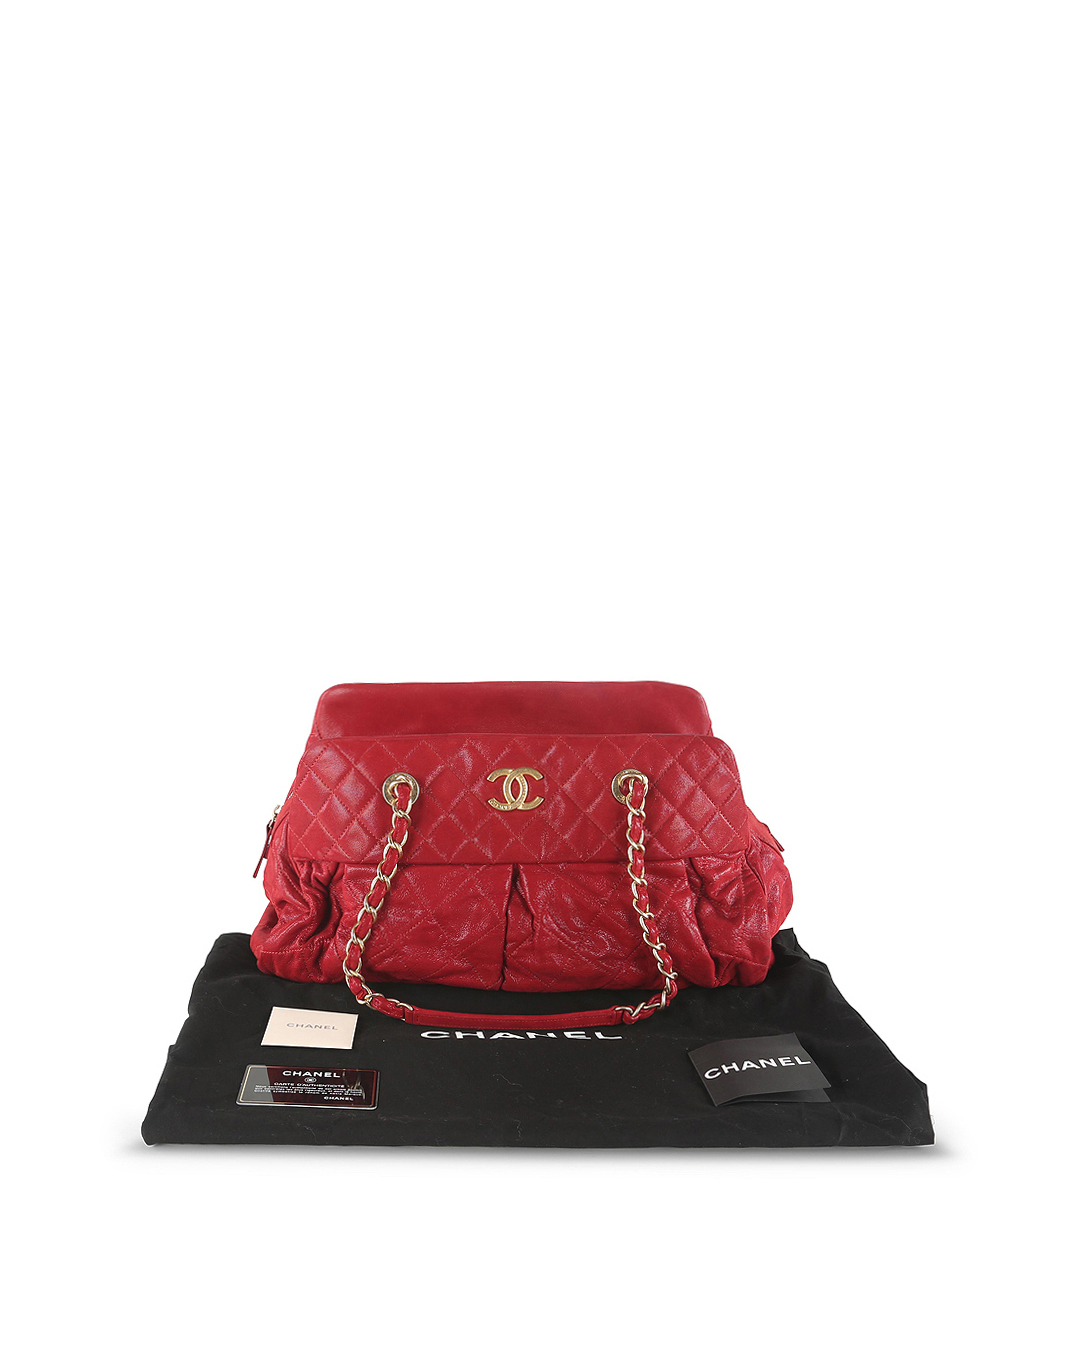 Chanel Shiny Red Quilted Leather Shoulder Bag